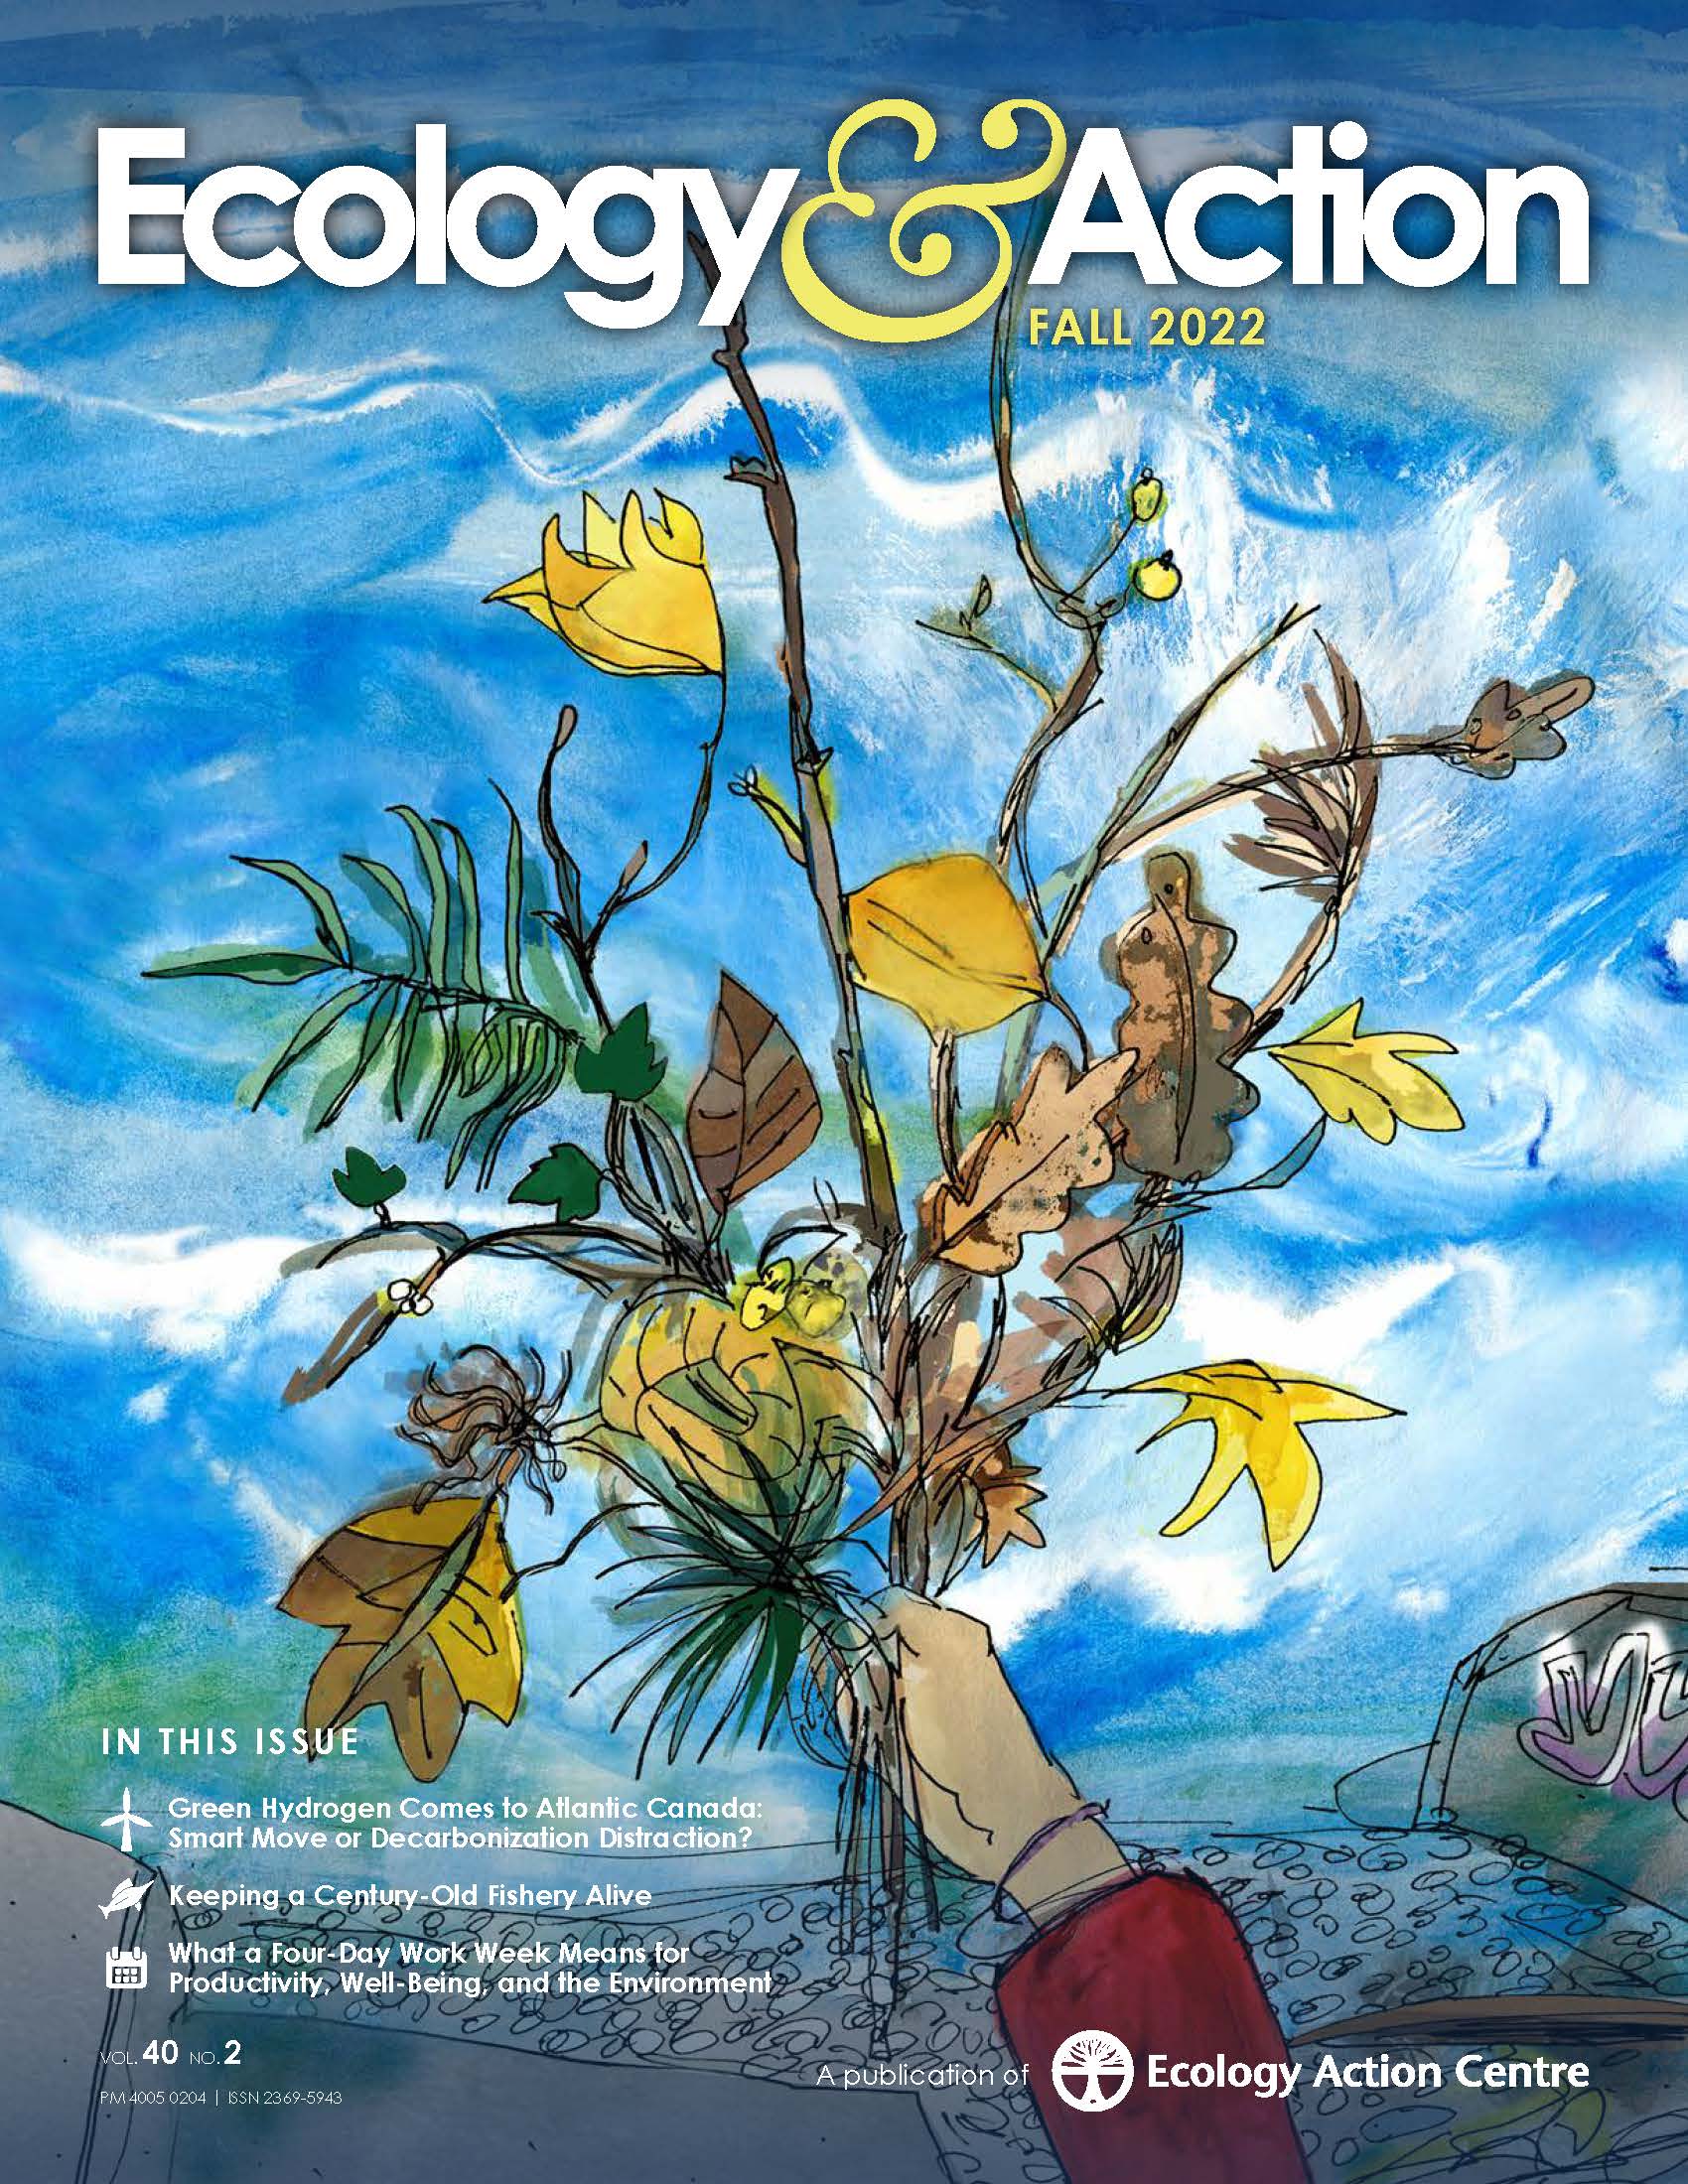 the cover of the Ecology & Action fall 2022 magazine